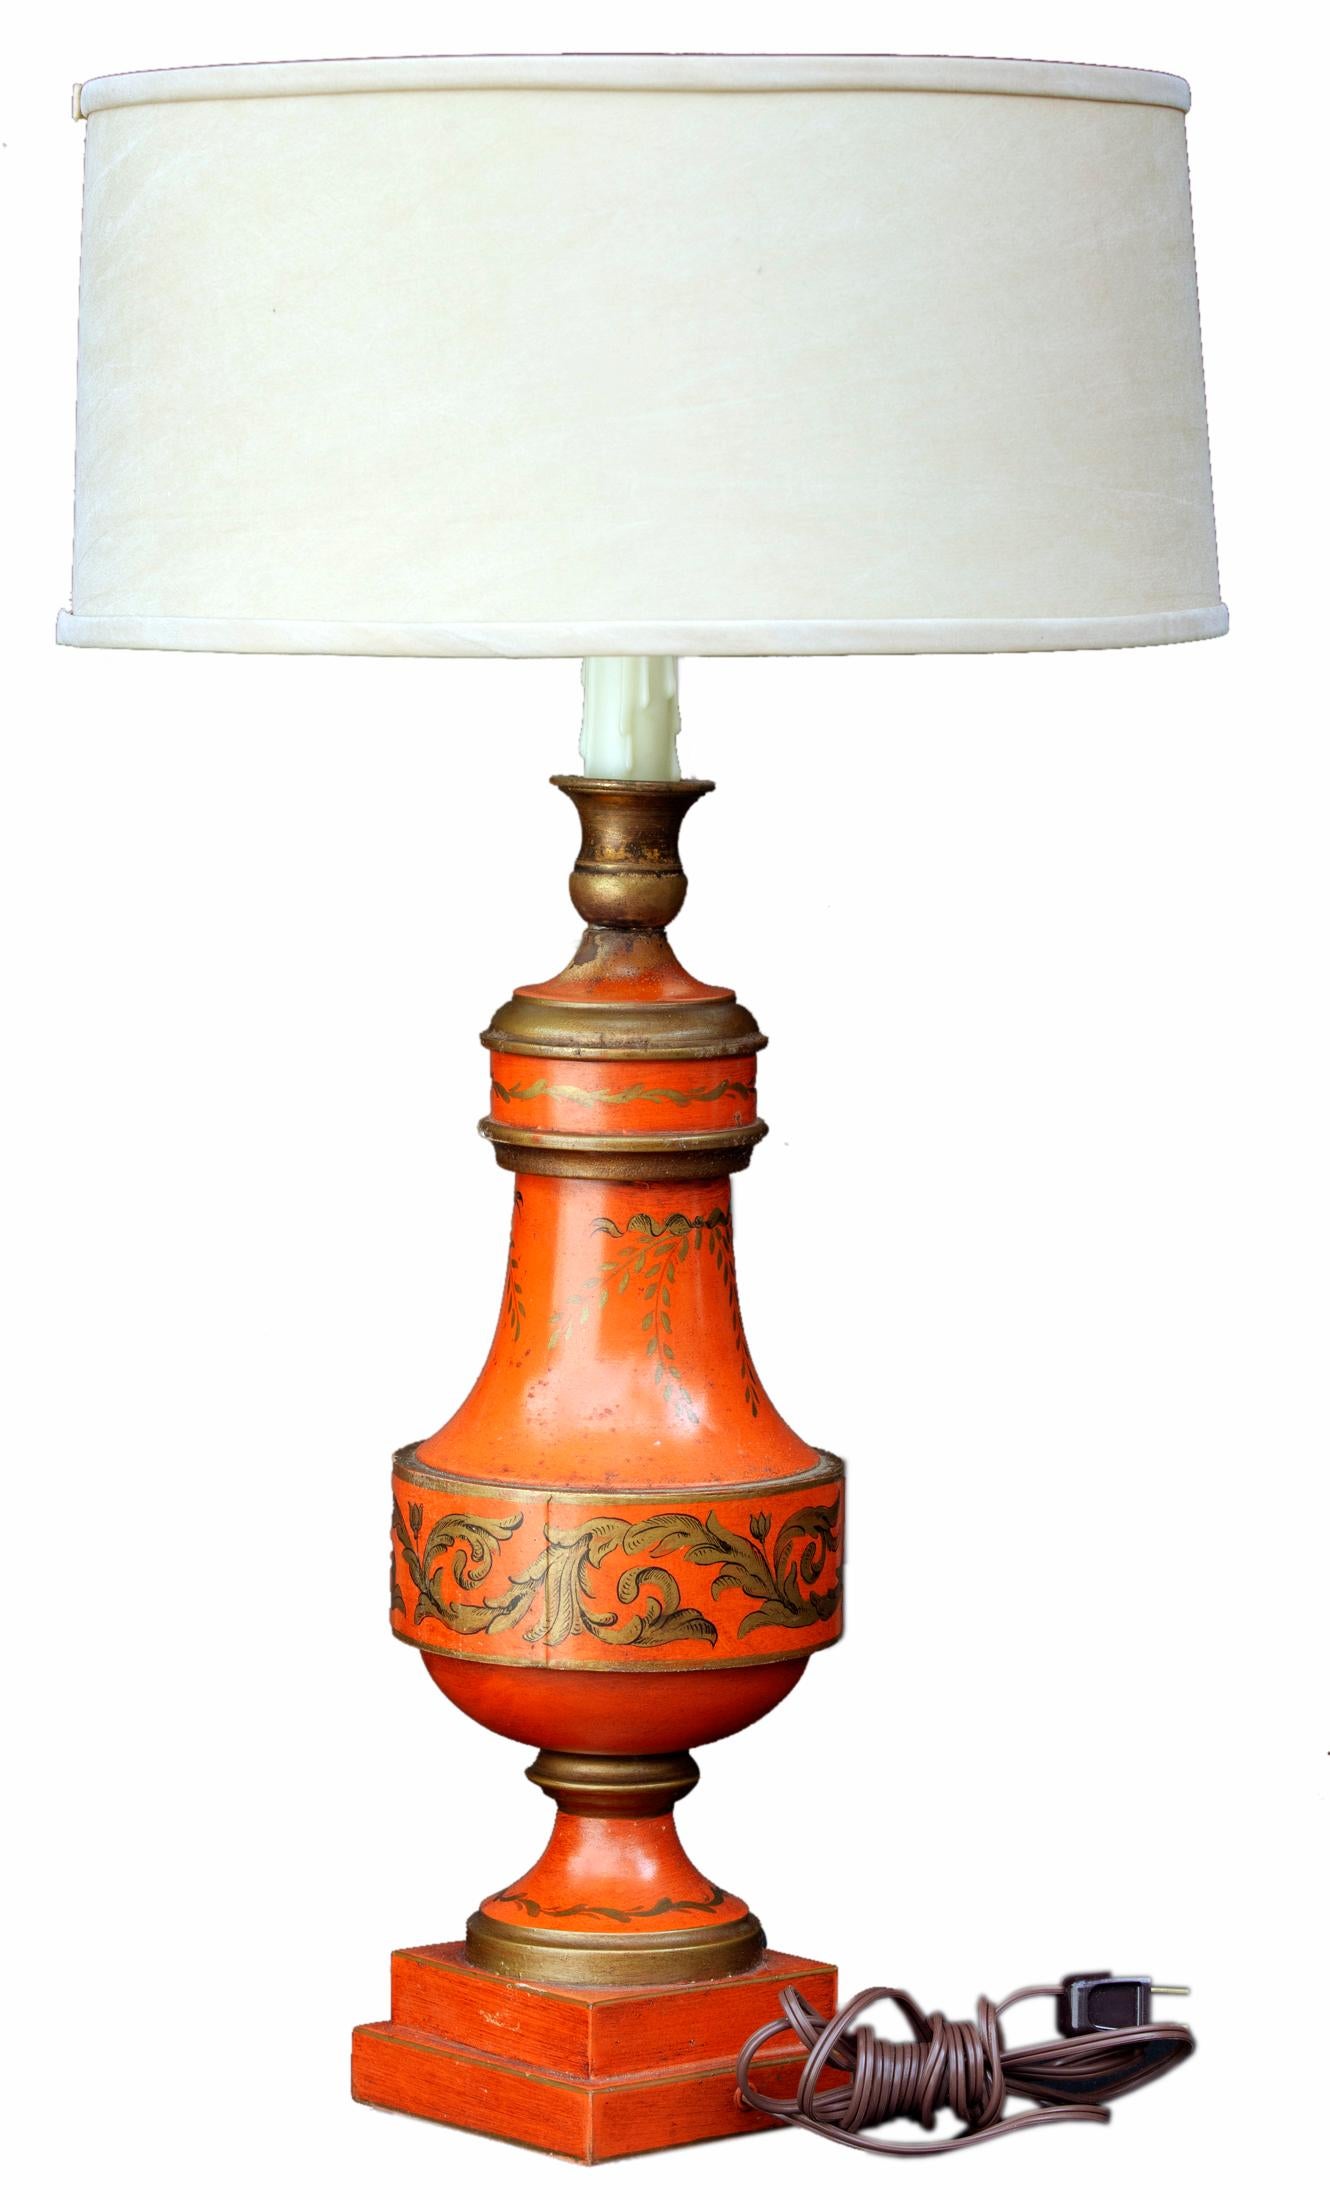 Italian toile lamp in Venetian red, decorated with gold scroll work.
